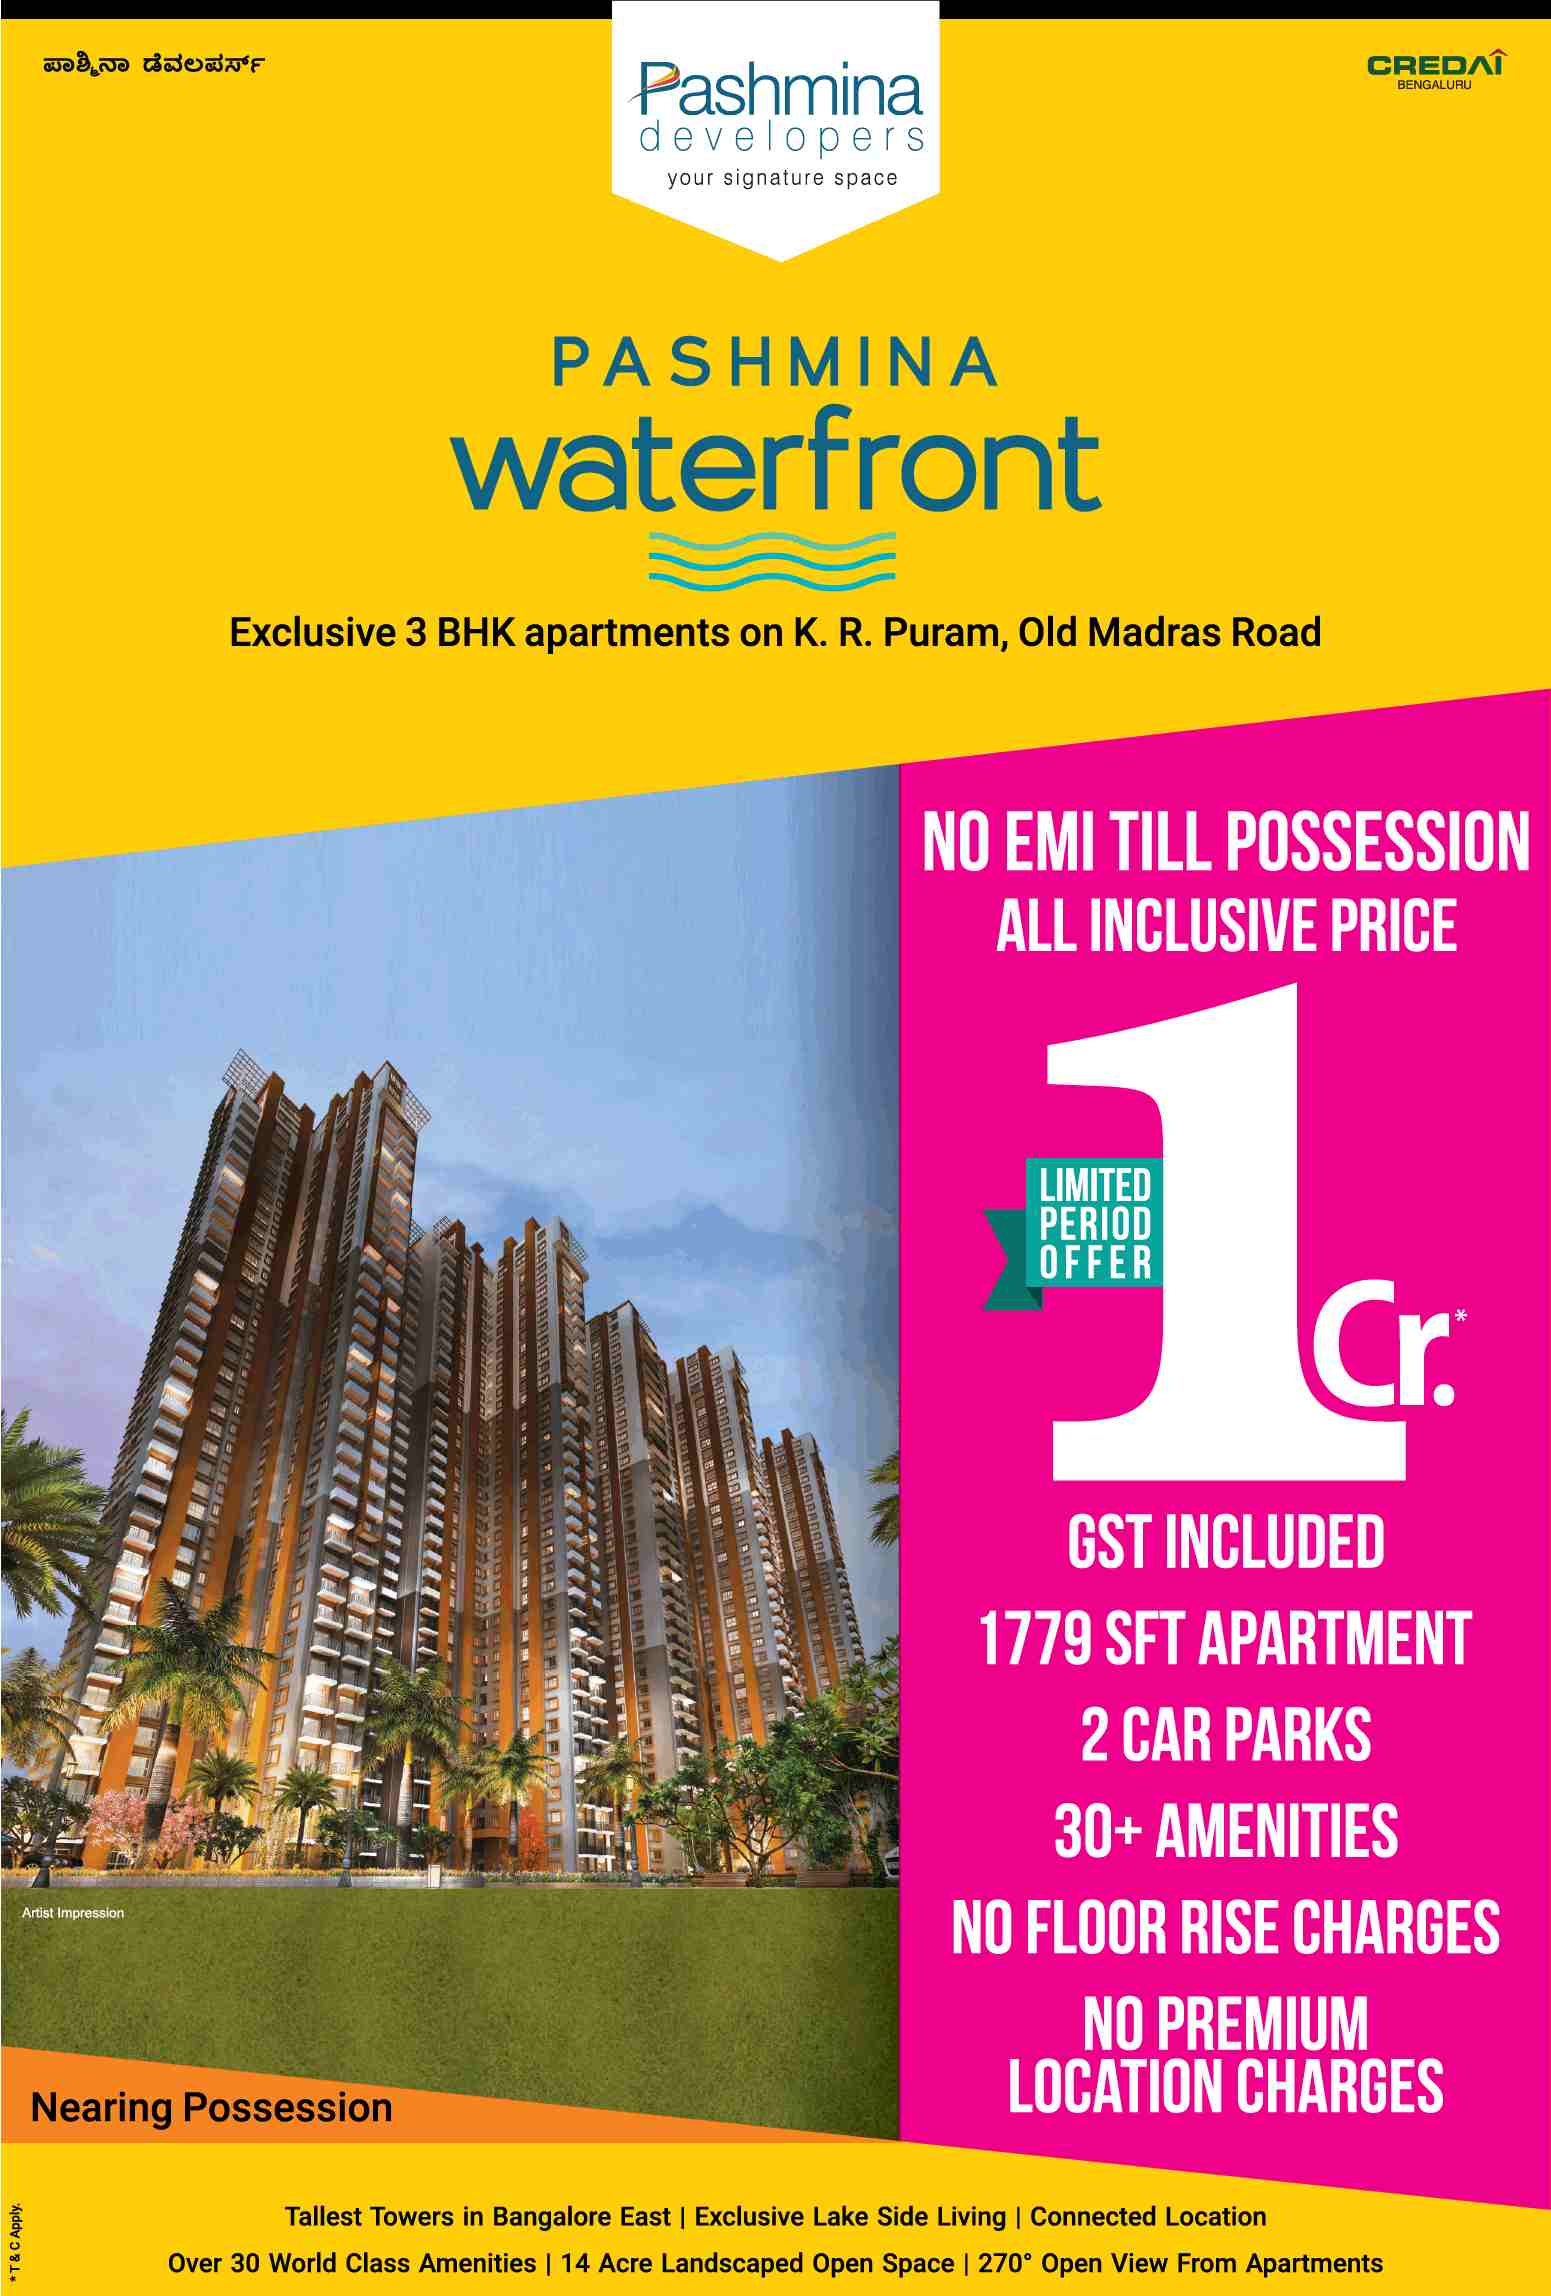 Book home & pay no EMI till possession at Pashmina Waterfront in Bangalore